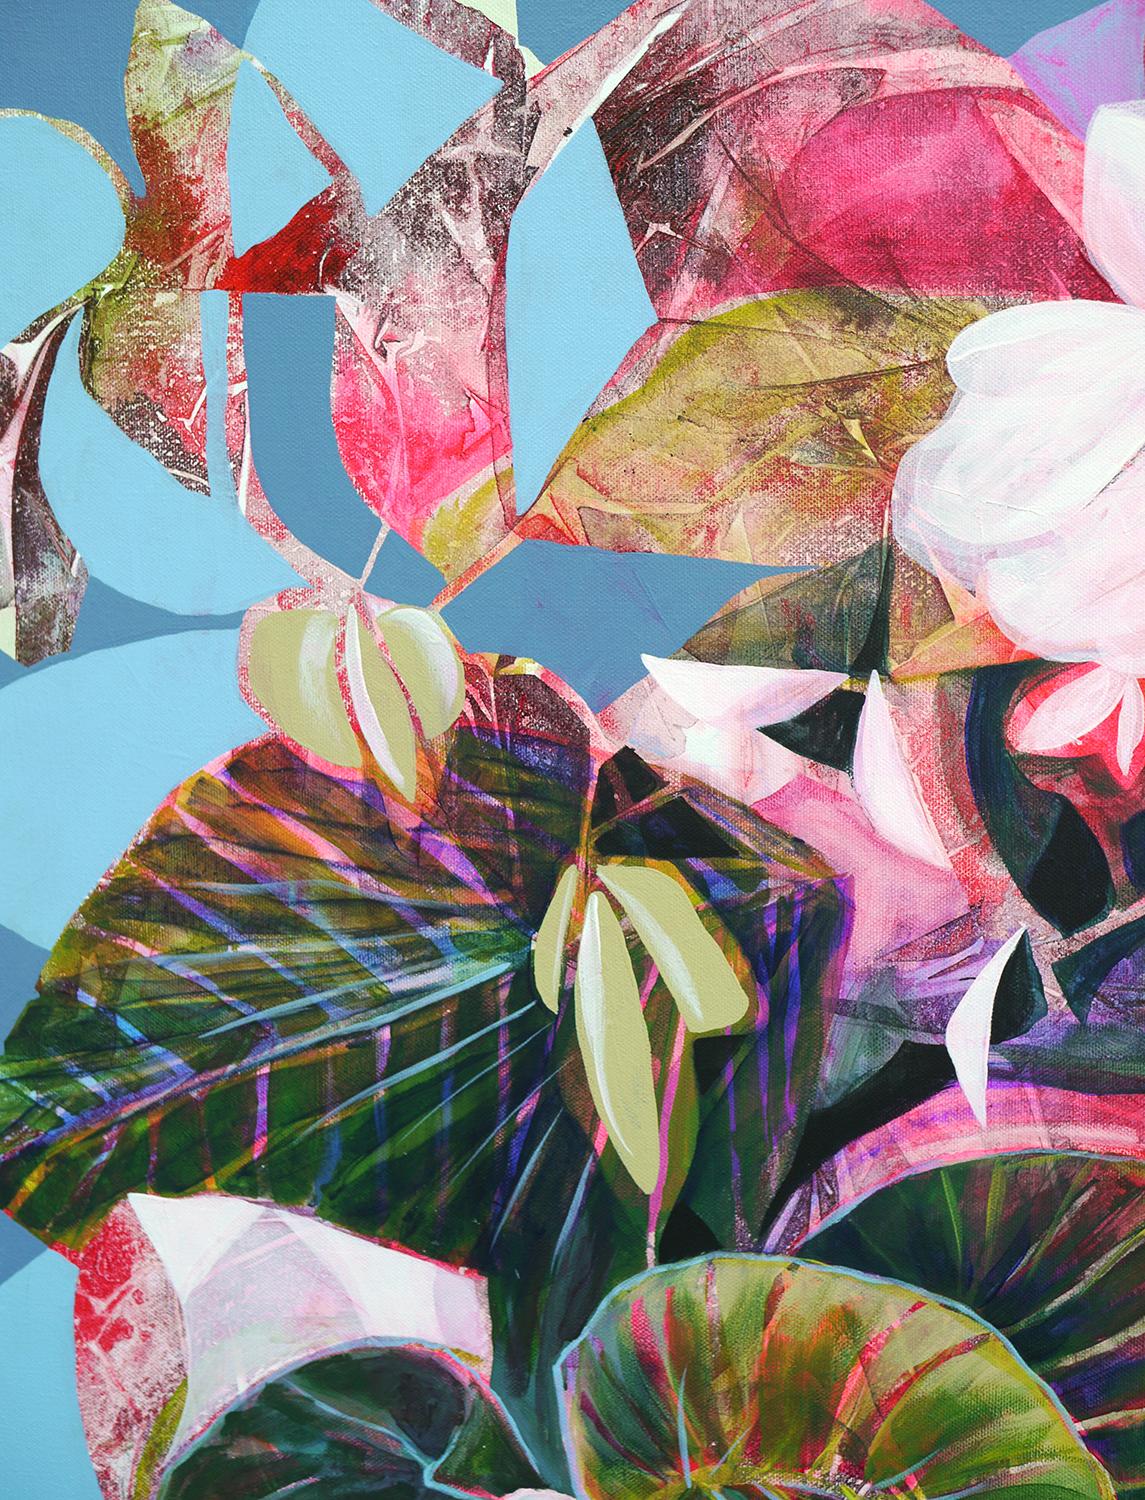 <p>Artist Comments<br>Contemporary still life inspired by a begonia plant. The rich colors and intricate patterns swarm together, inviting the viewer to follow the trail. Layers of transparent color and opaque shapes sit on the surface suggesting an